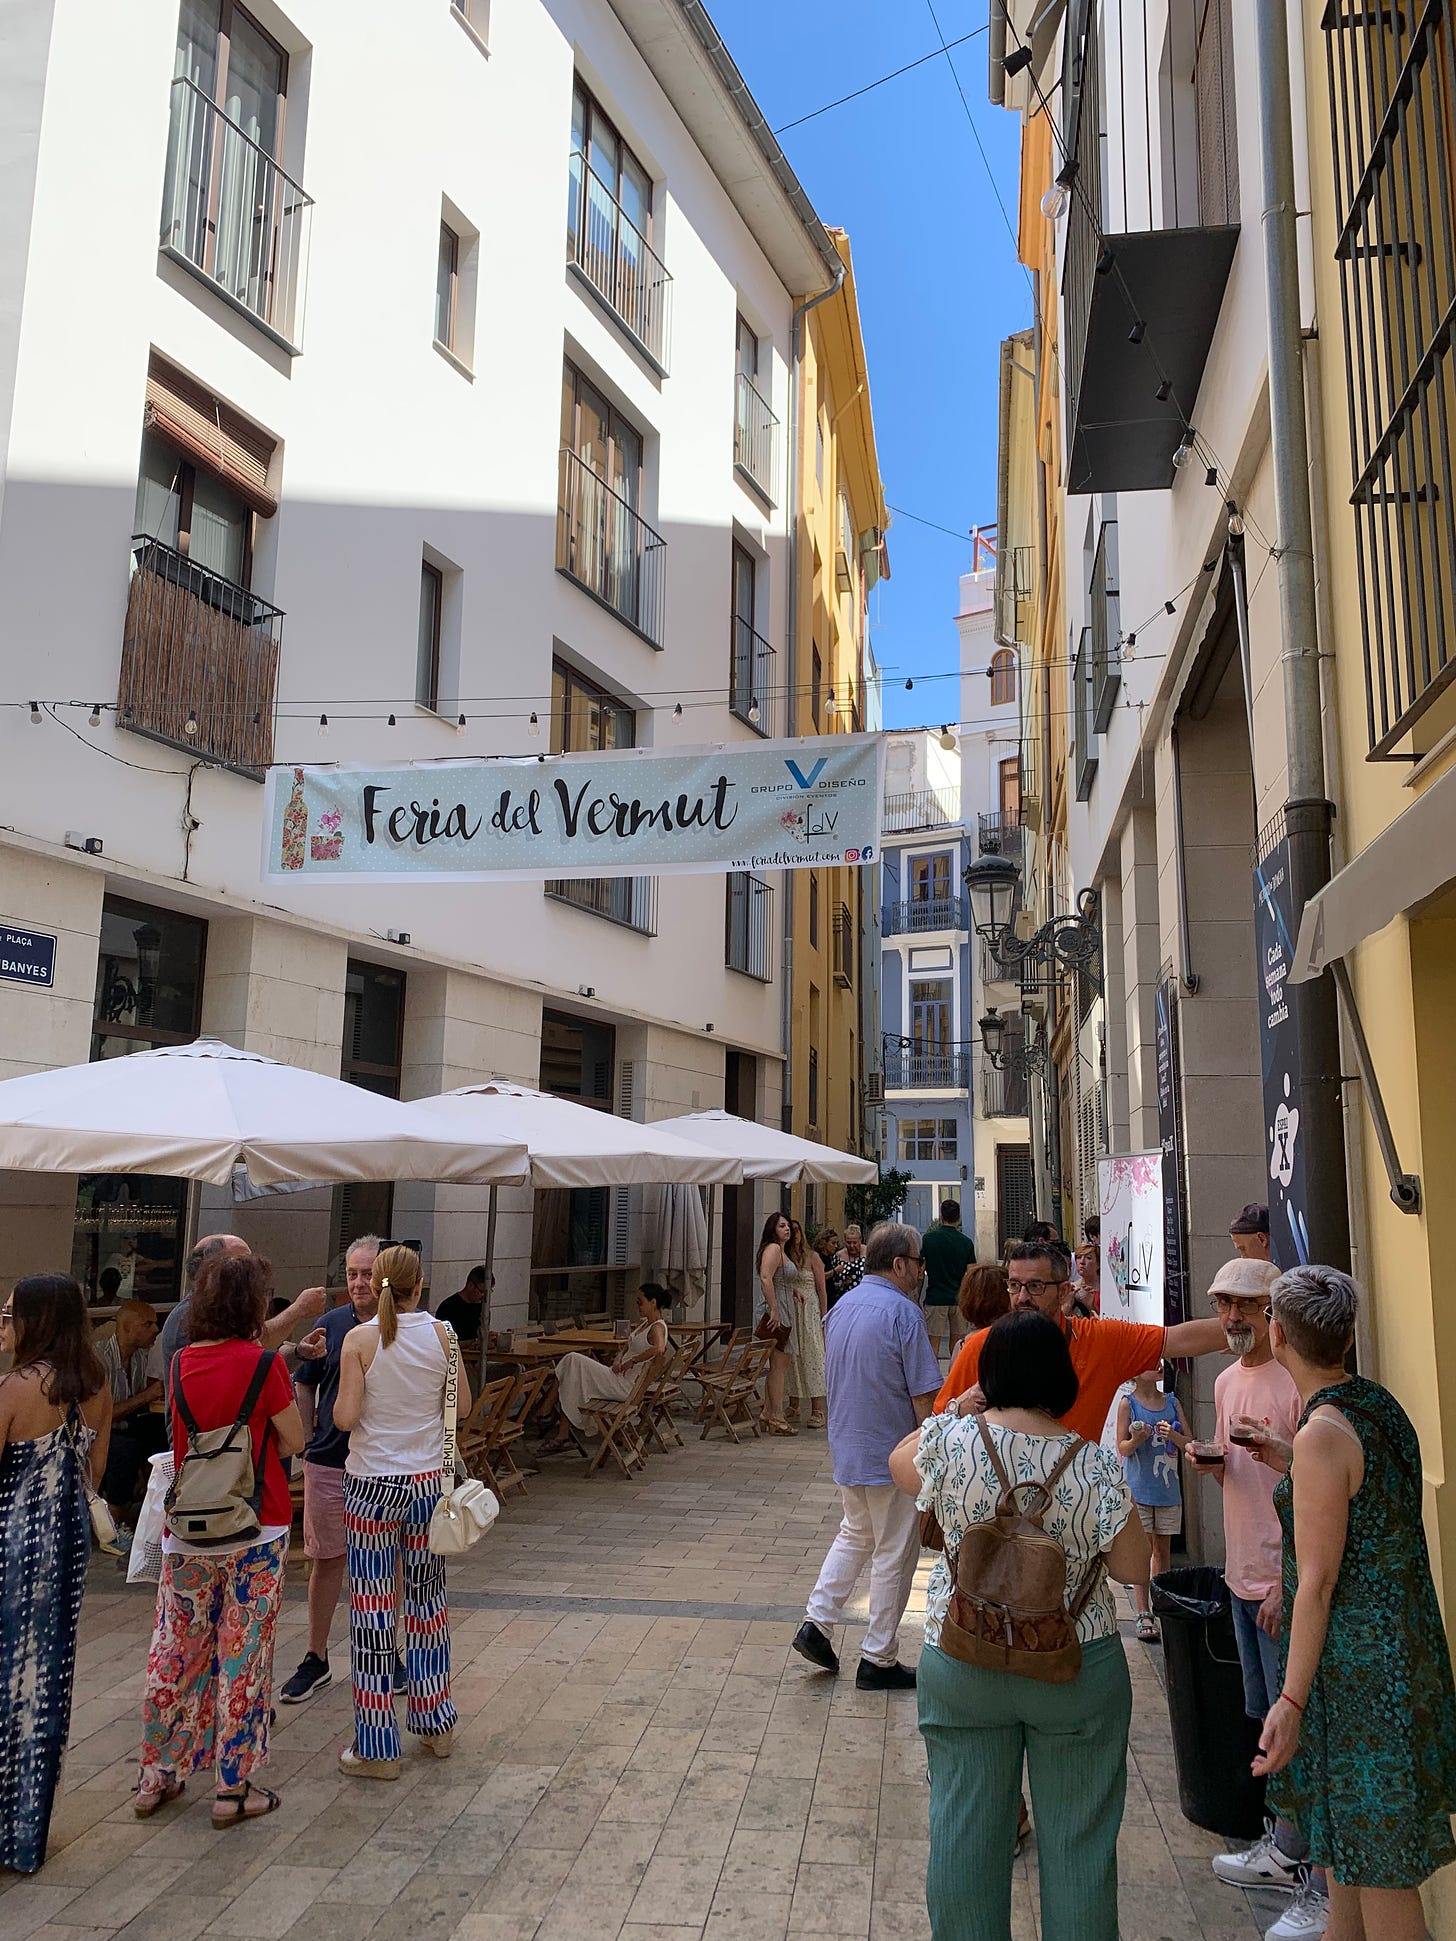 A narrow pedestrian street with a "Feria del Vermut" banner stretched across it and people enjoying glasses of vermut 